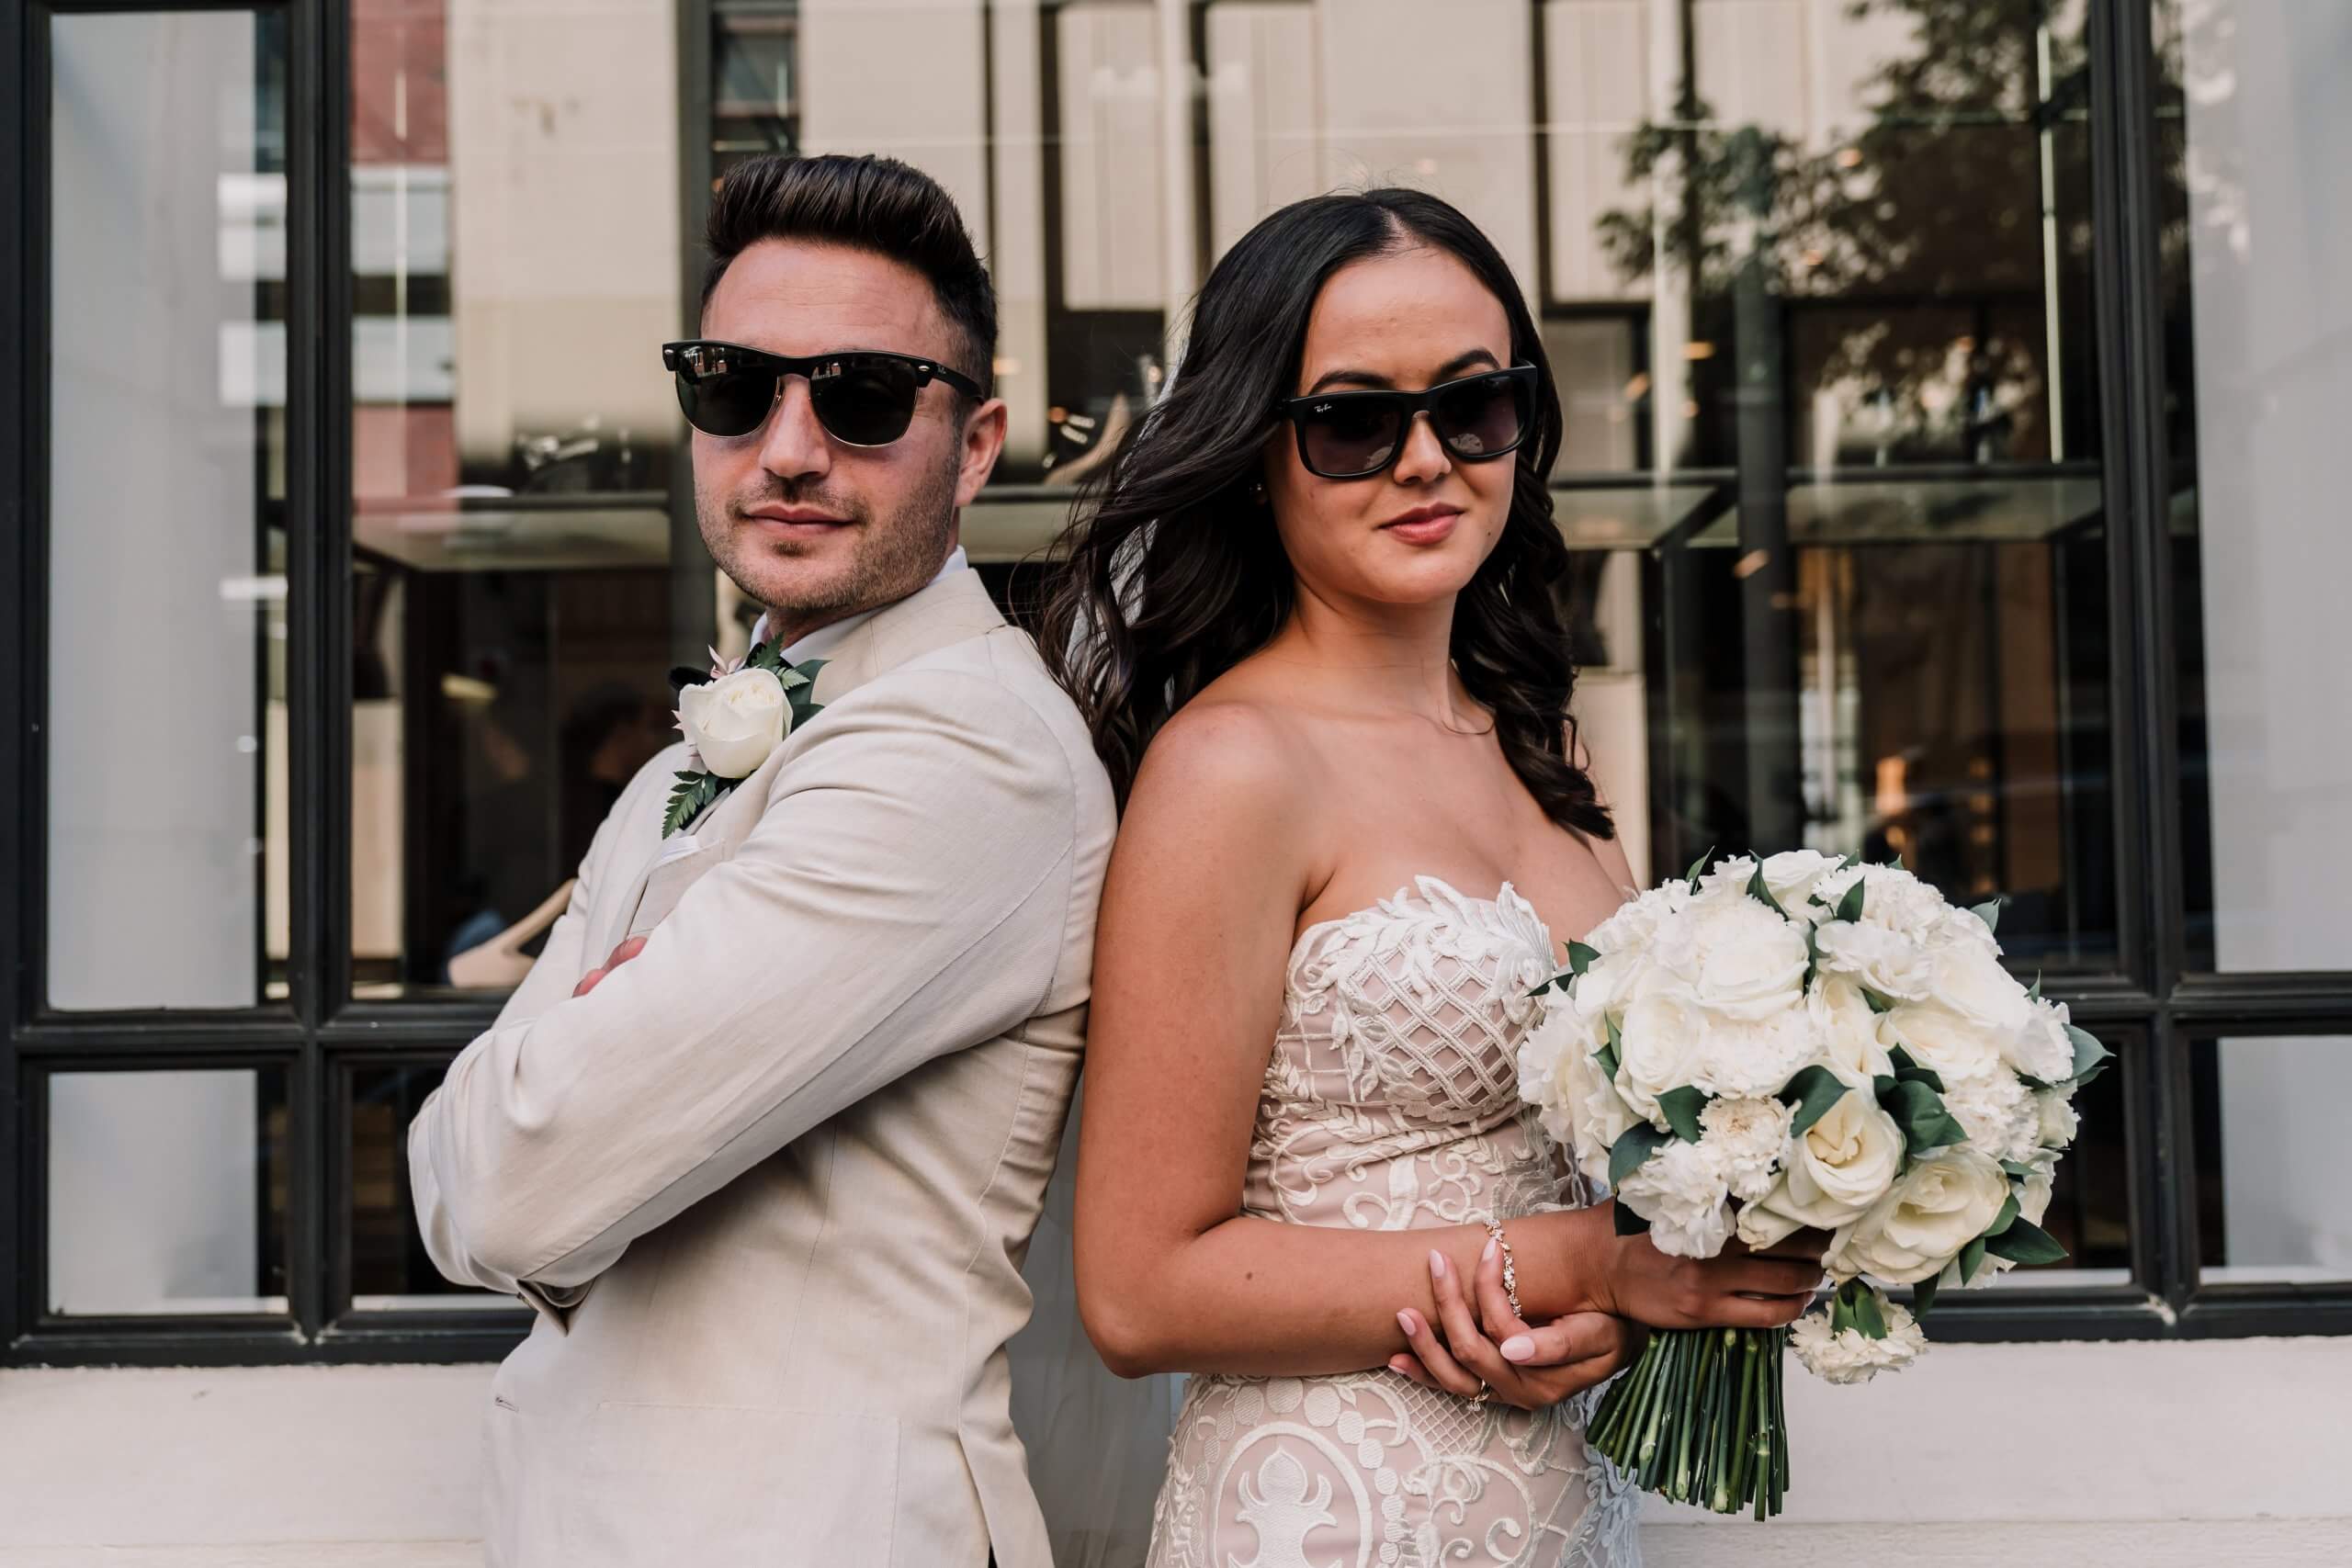 couple does a cool pose with sunglasses on, Captured by Black Avenue Productions